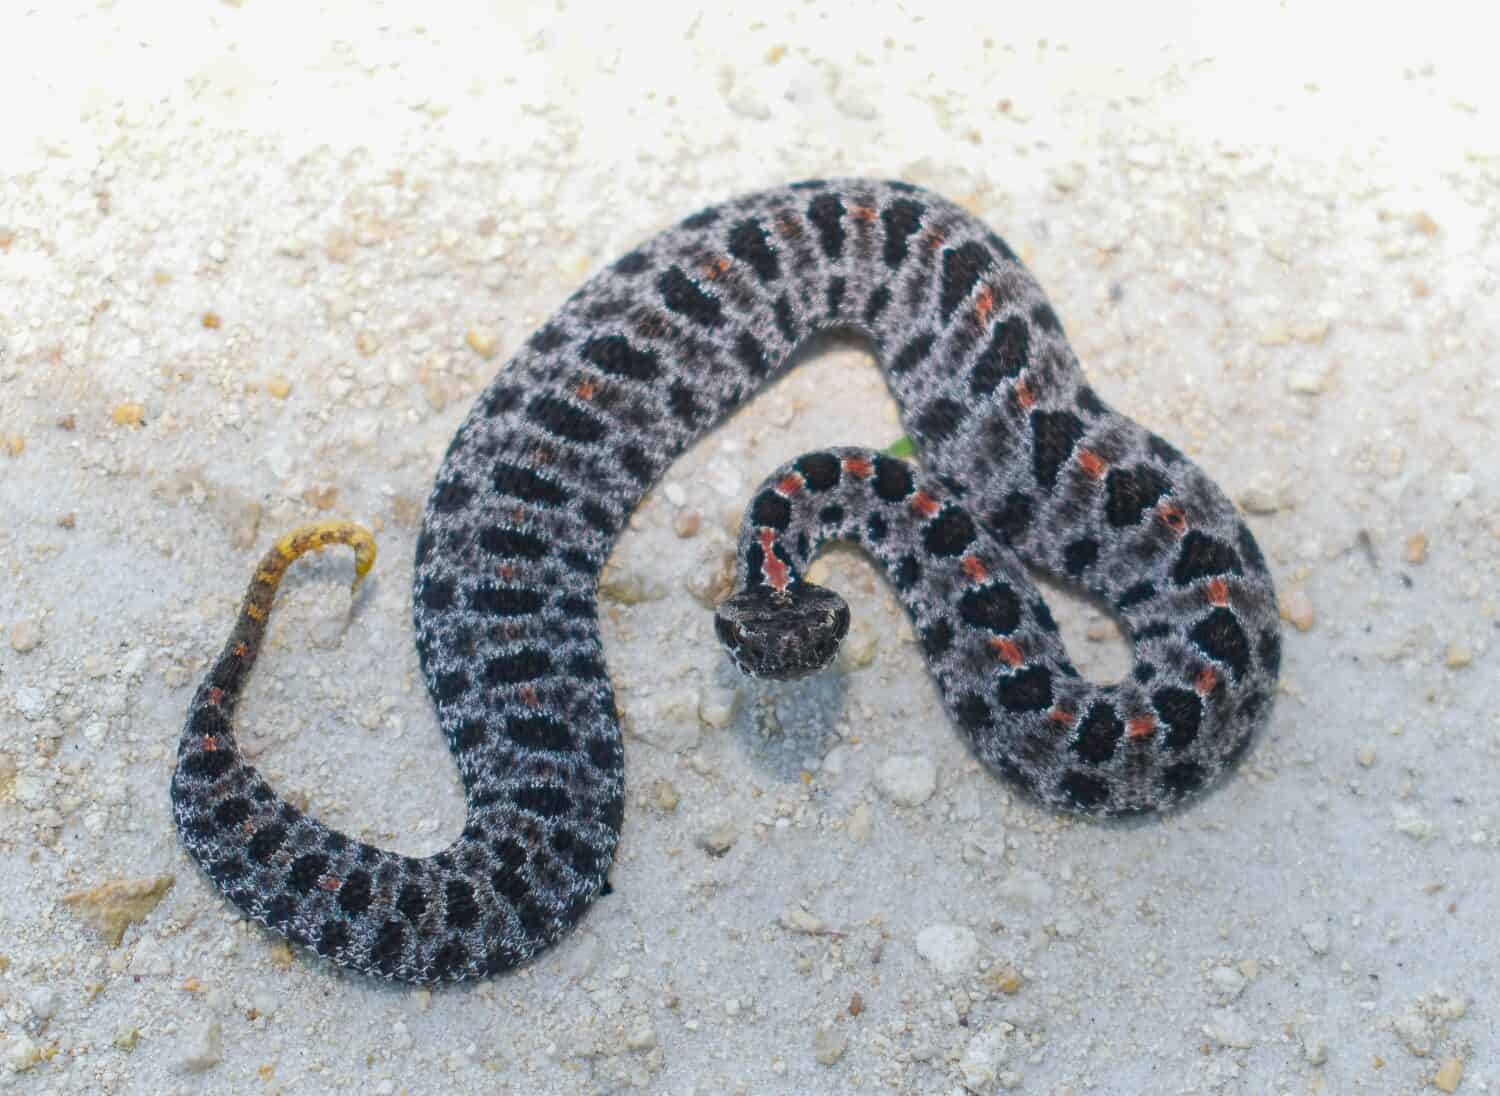 A pigmy rattlesnake on dirt with its rattle visible.